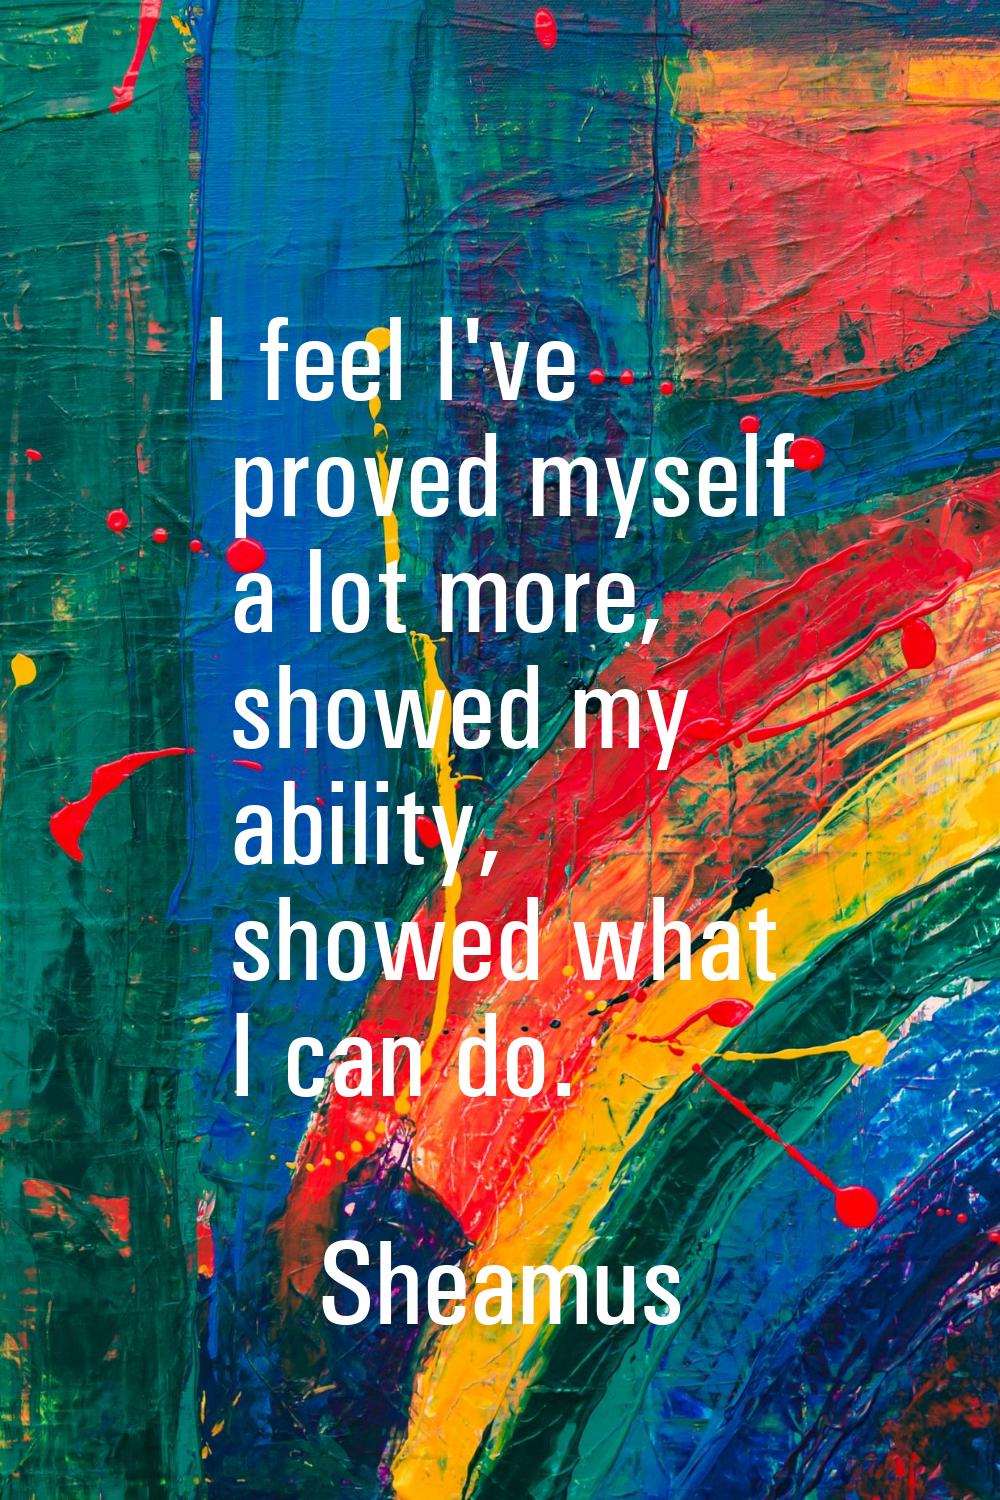 I feel I've proved myself a lot more, showed my ability, showed what I can do.